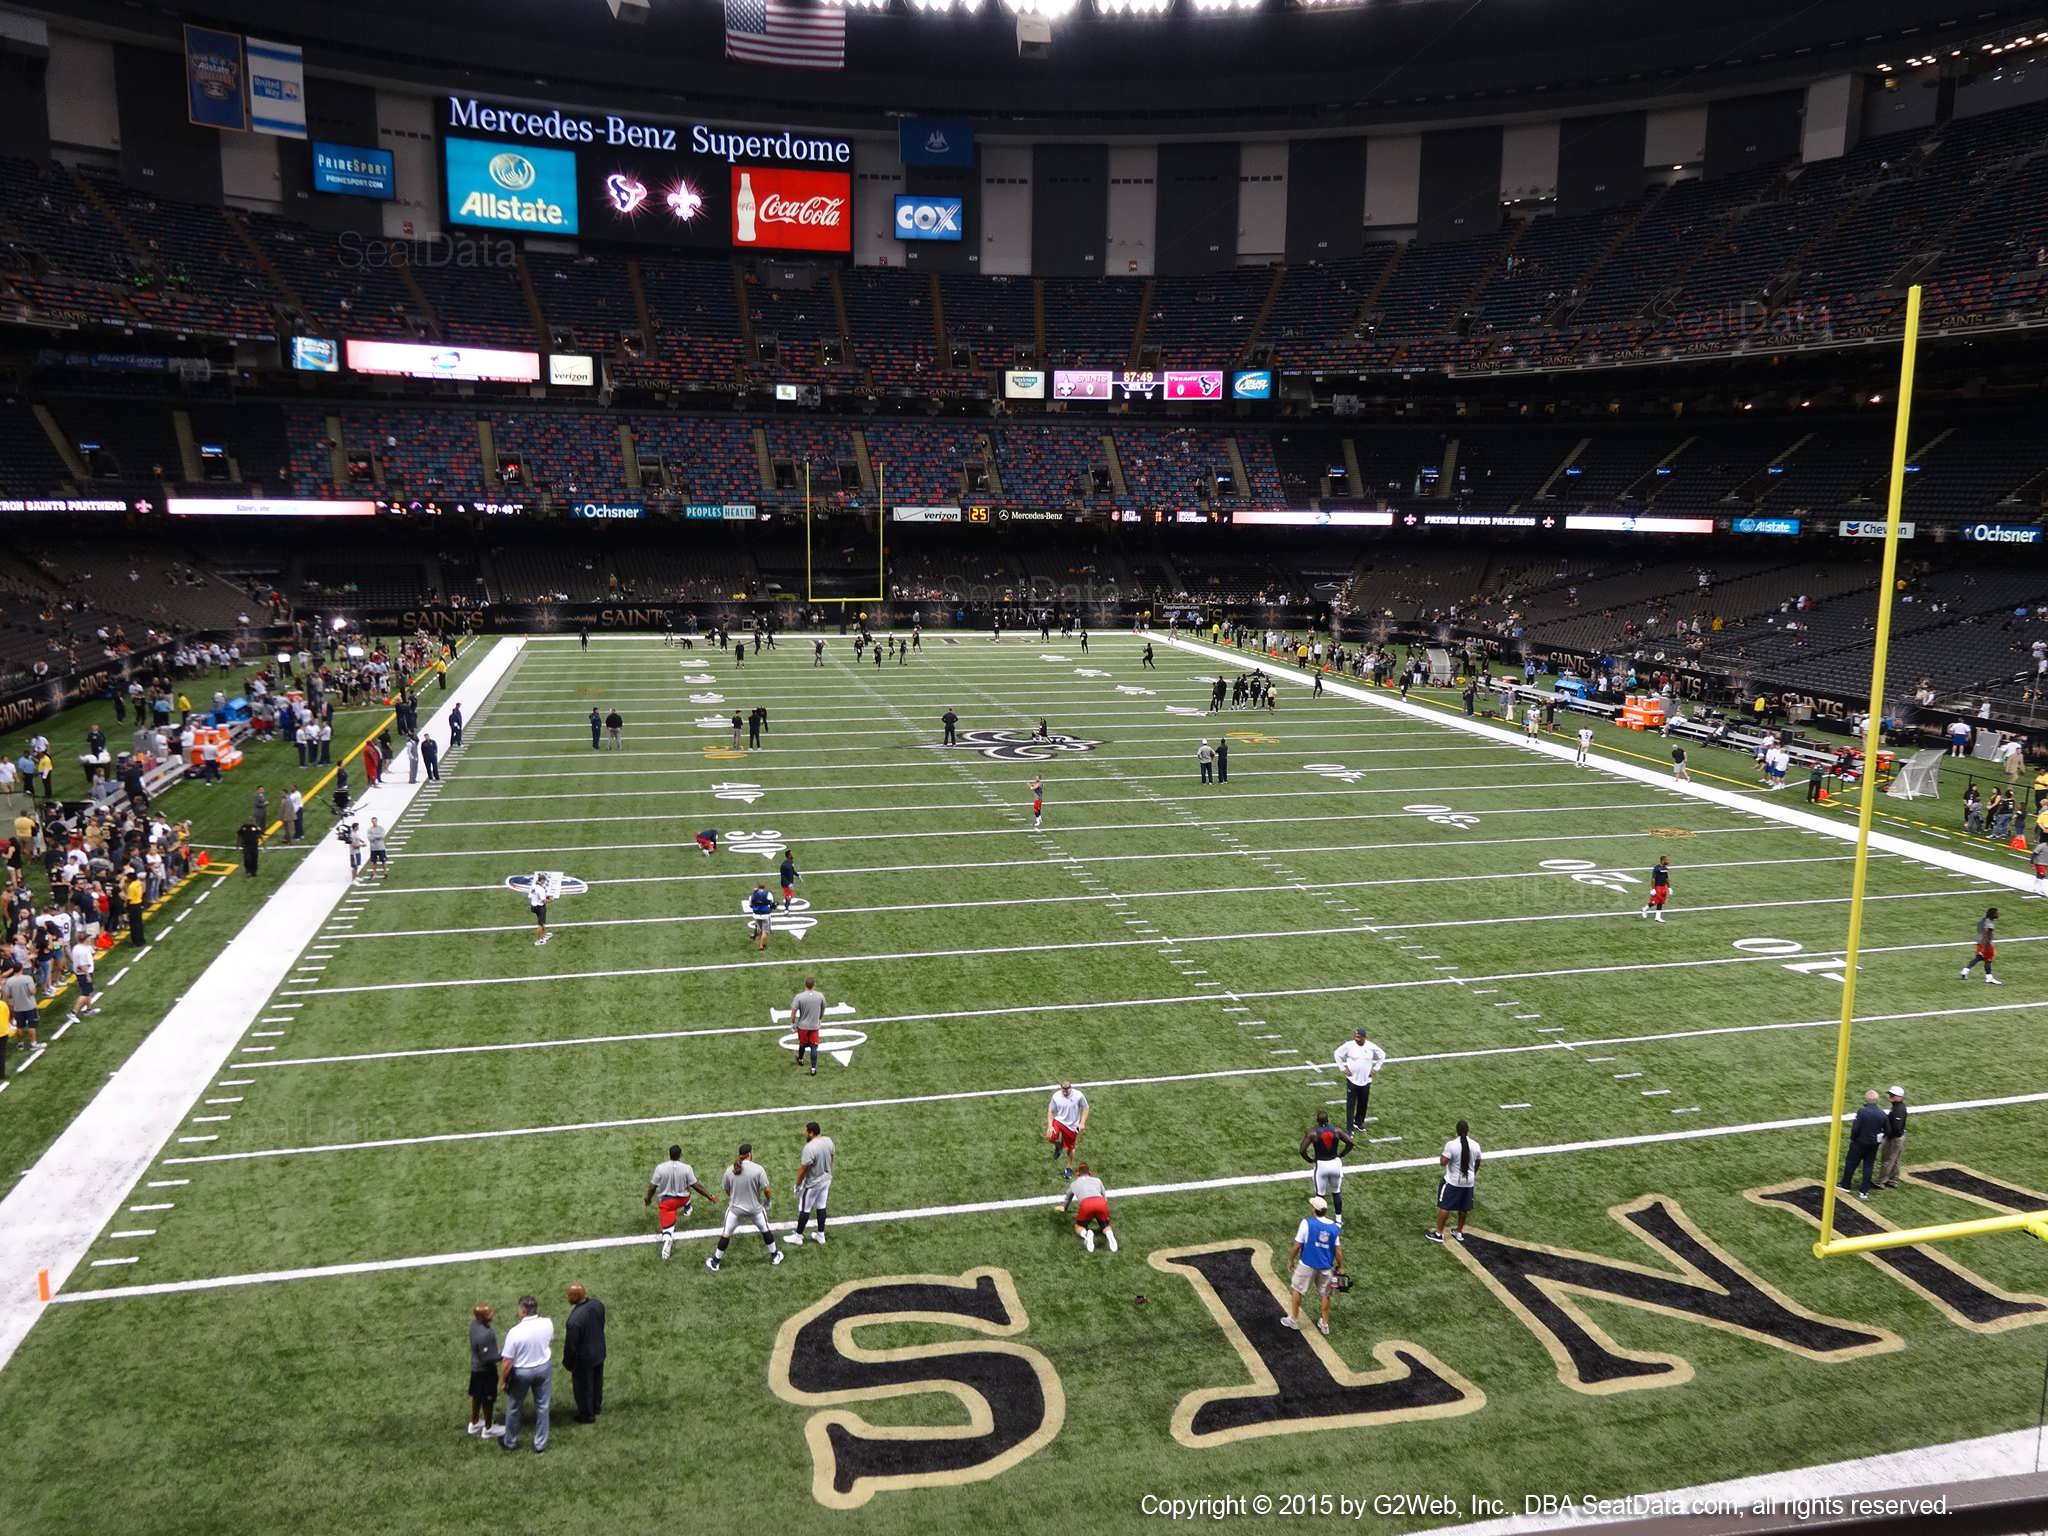 Seat view from section 203 at the Mercedes-Benz Superdome, home of the New Orleans Saints